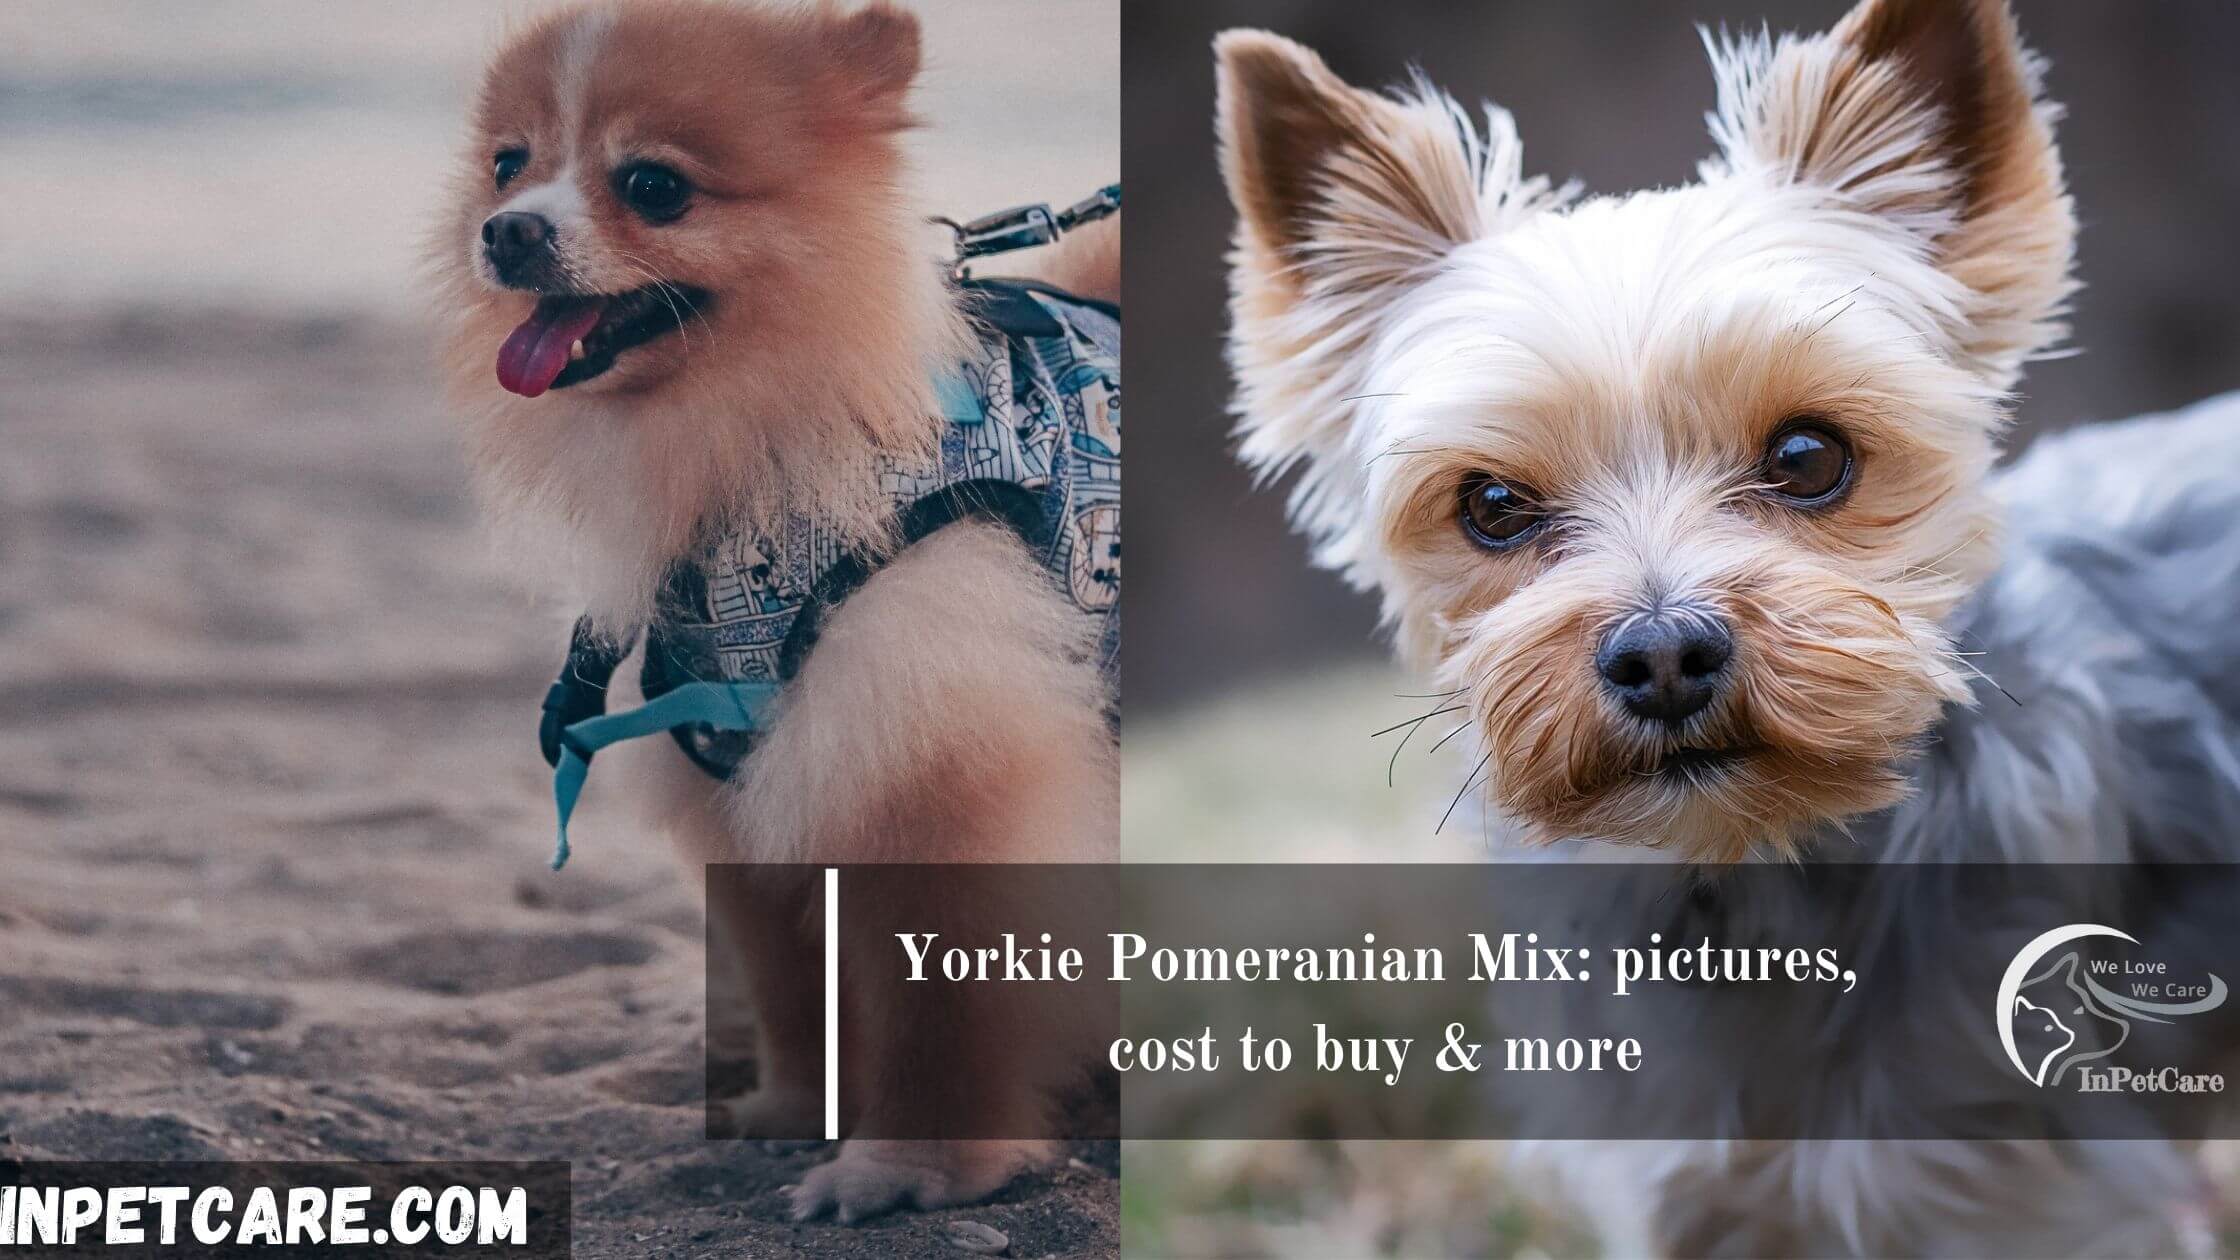 Yorkie Pomeranian Mix: pictures, cost to buy & more